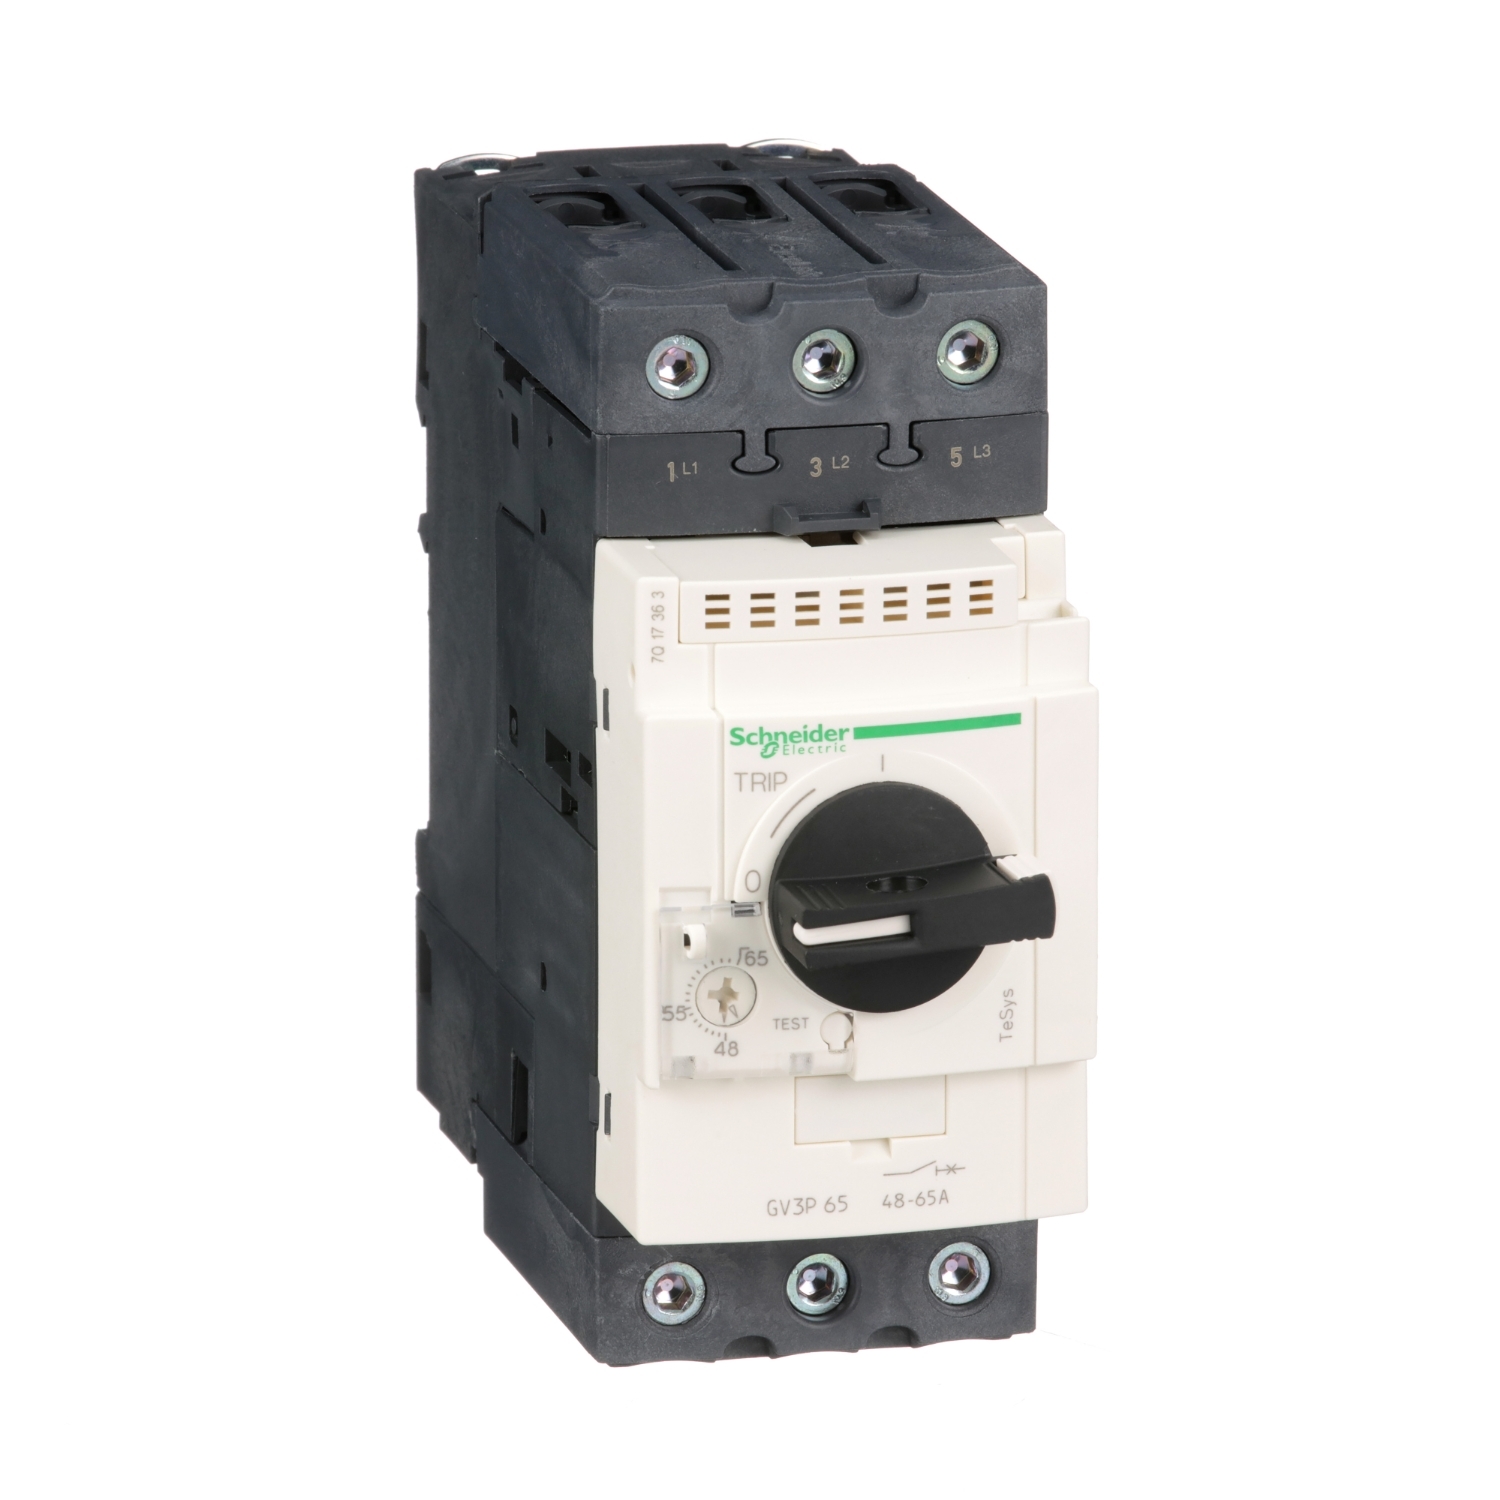 Motor circuit breaker, TeSys Deca, 3P, 48 to 65A, thermal magnetic, EverLink terminals